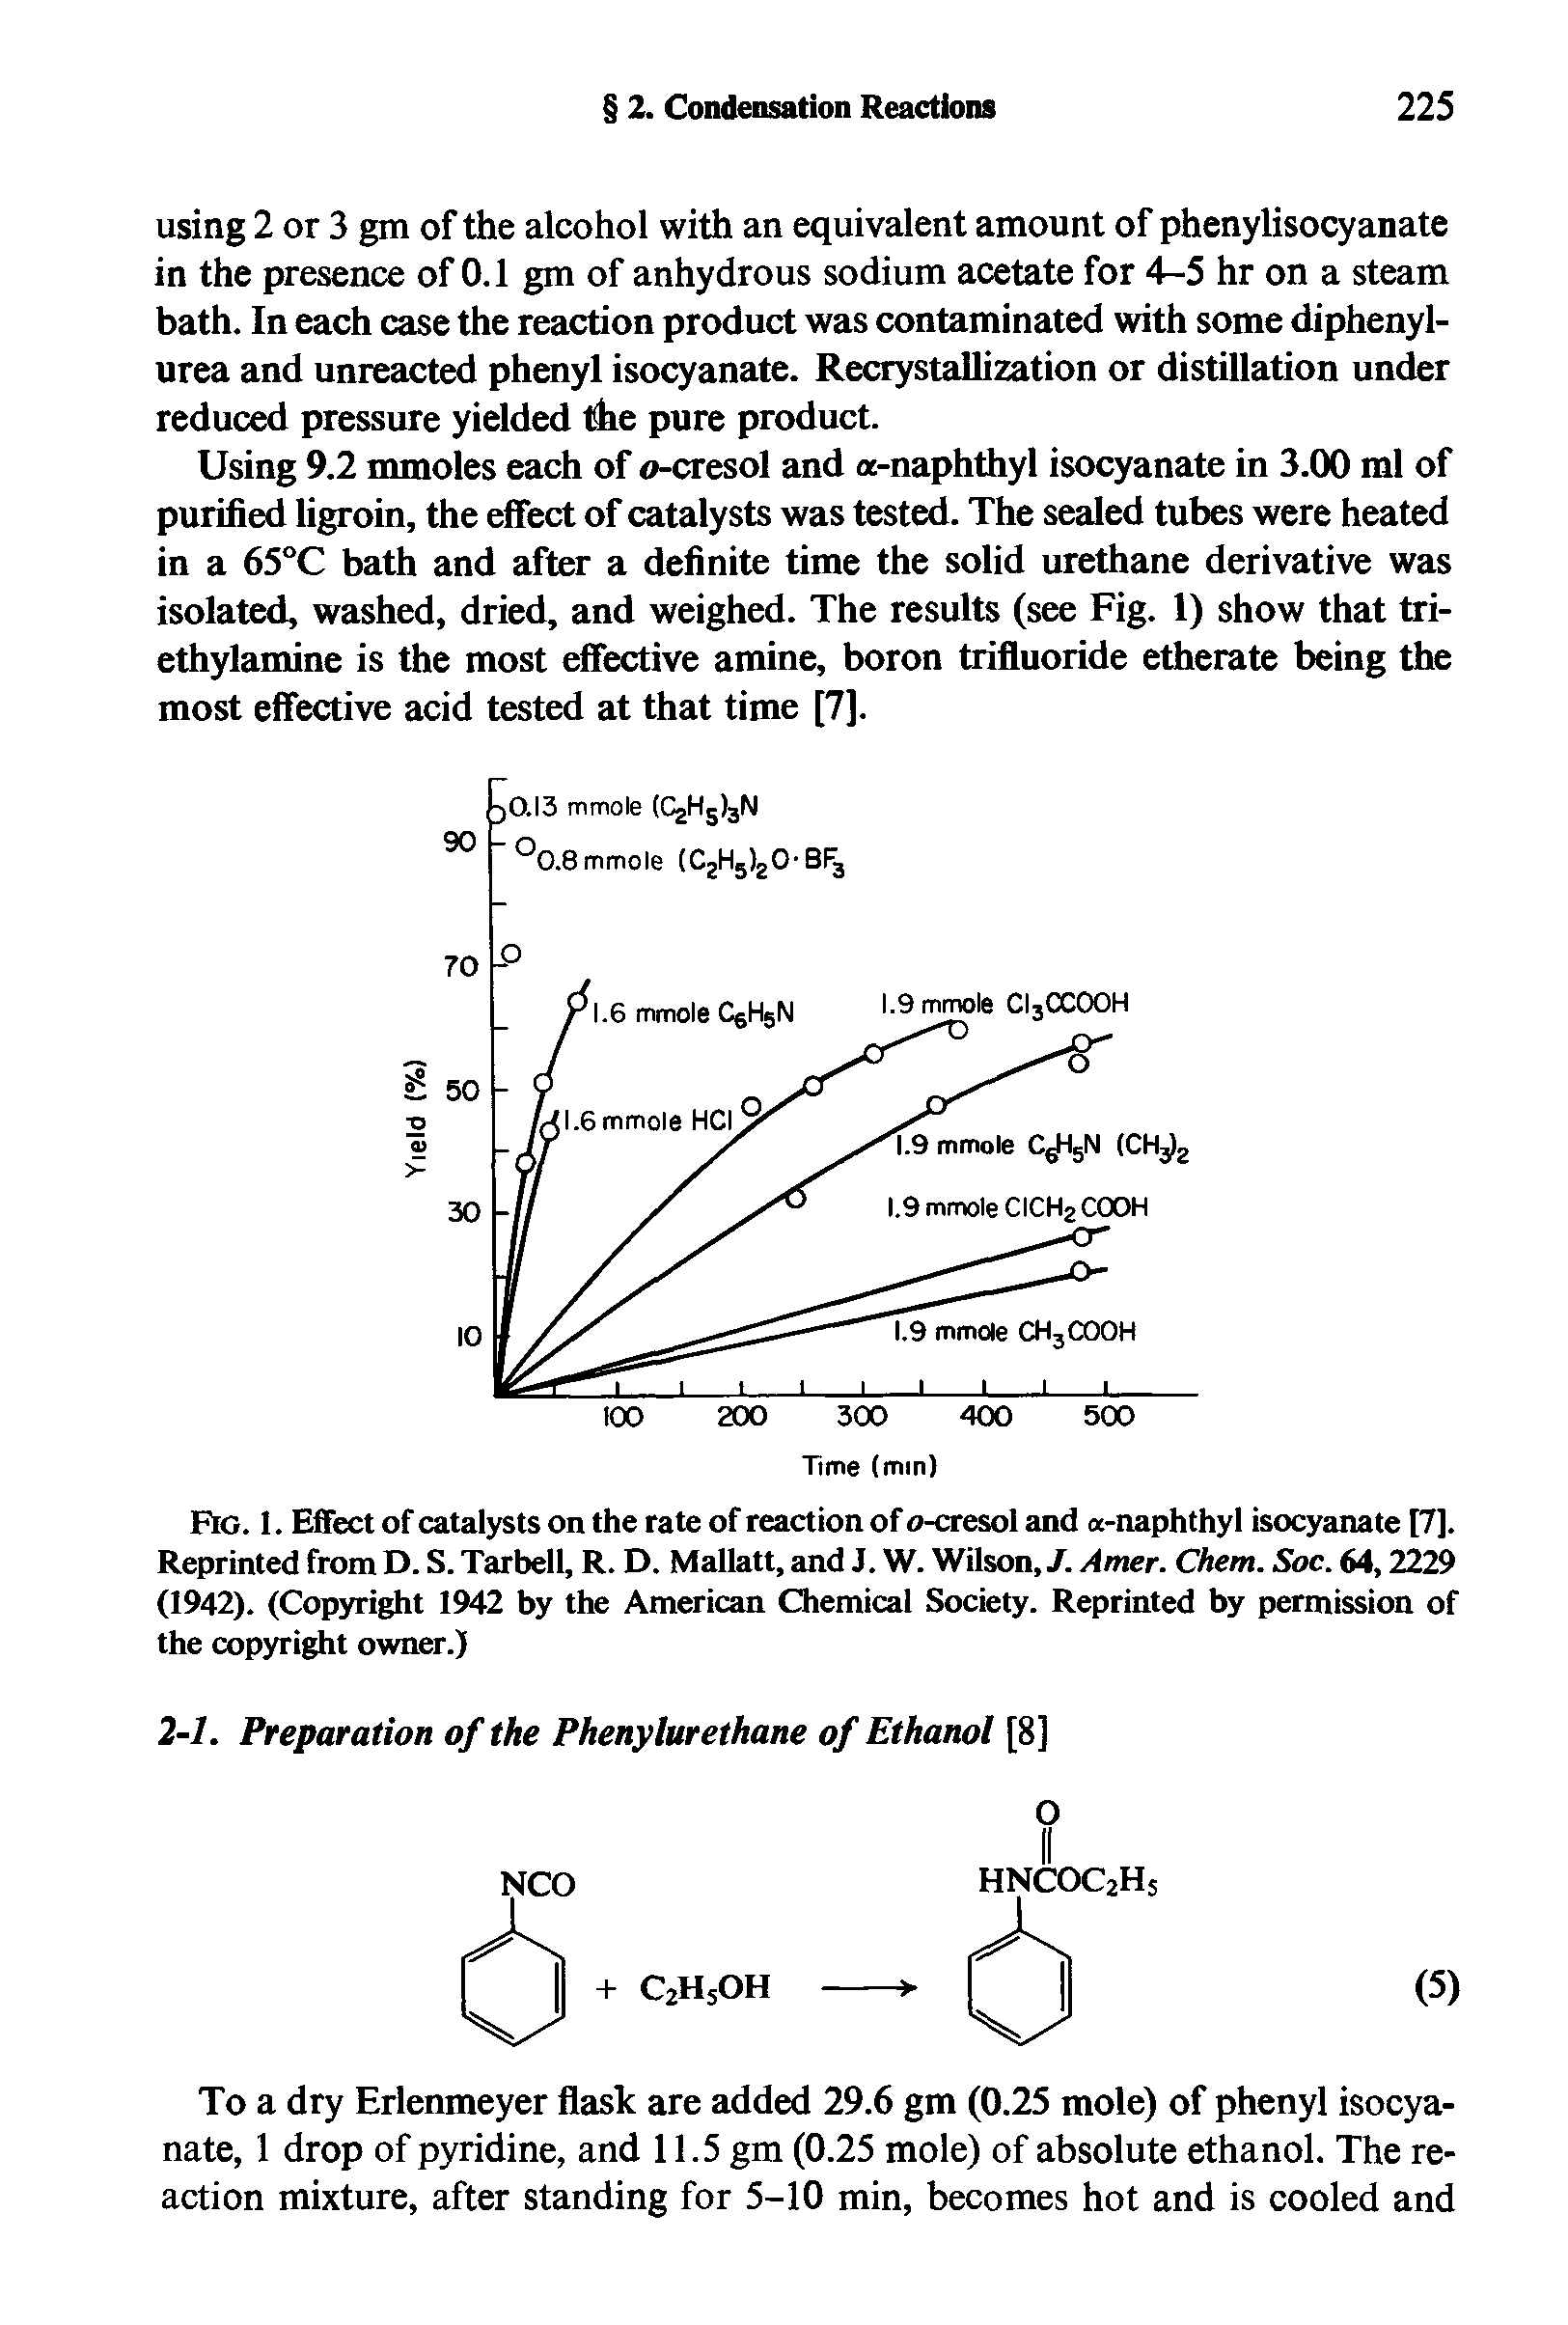 Fig. 1. Effect of catalysts on the rate of reaction of o-cresol and a-naphthyl isocyanate [7]. Reprinted from D. S. Tarbell, R. D. Mallatt, and J. W. Wilson, J. Amer. Chem. Soc. 64,2229 (1942). (Copyright 1942 by the American Chemical Society. Reprinted by permission of the copyright owner.)...